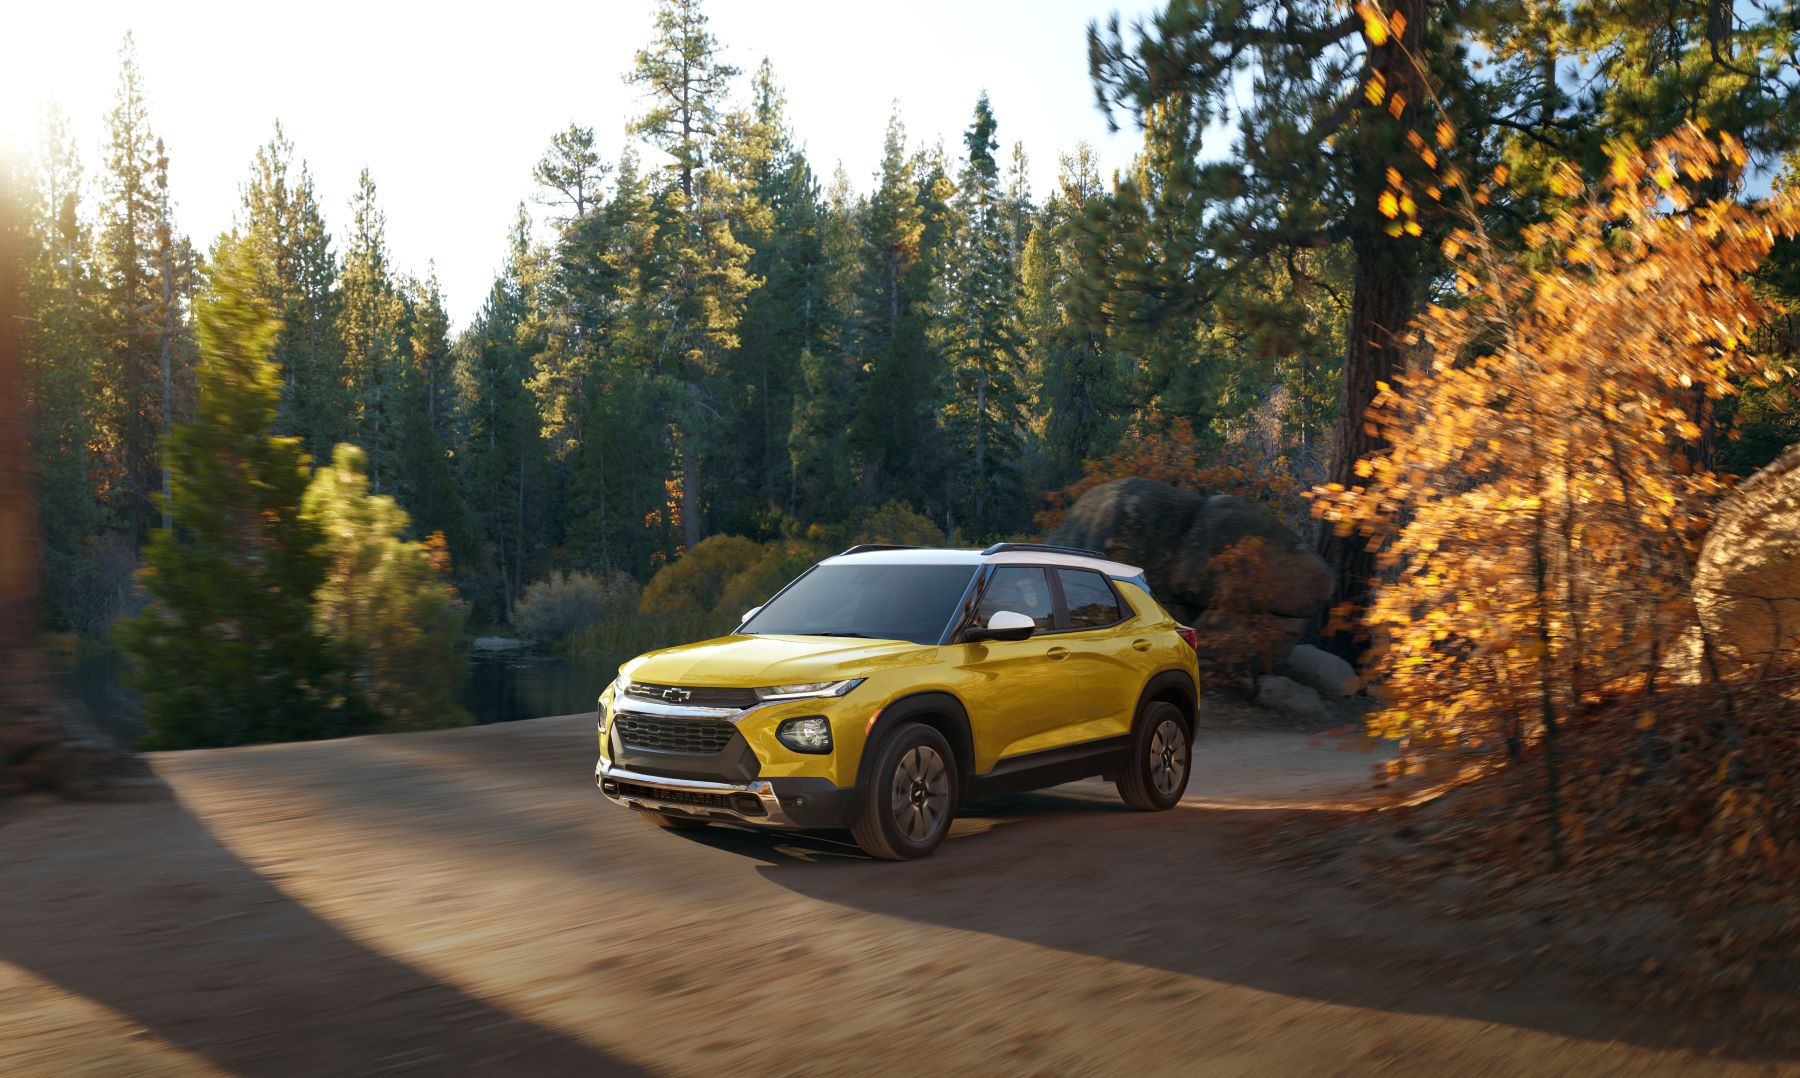 2023 Chevrolet Trailblazer subcompact crossover SUV in Nitro Yellow driving on a forest road